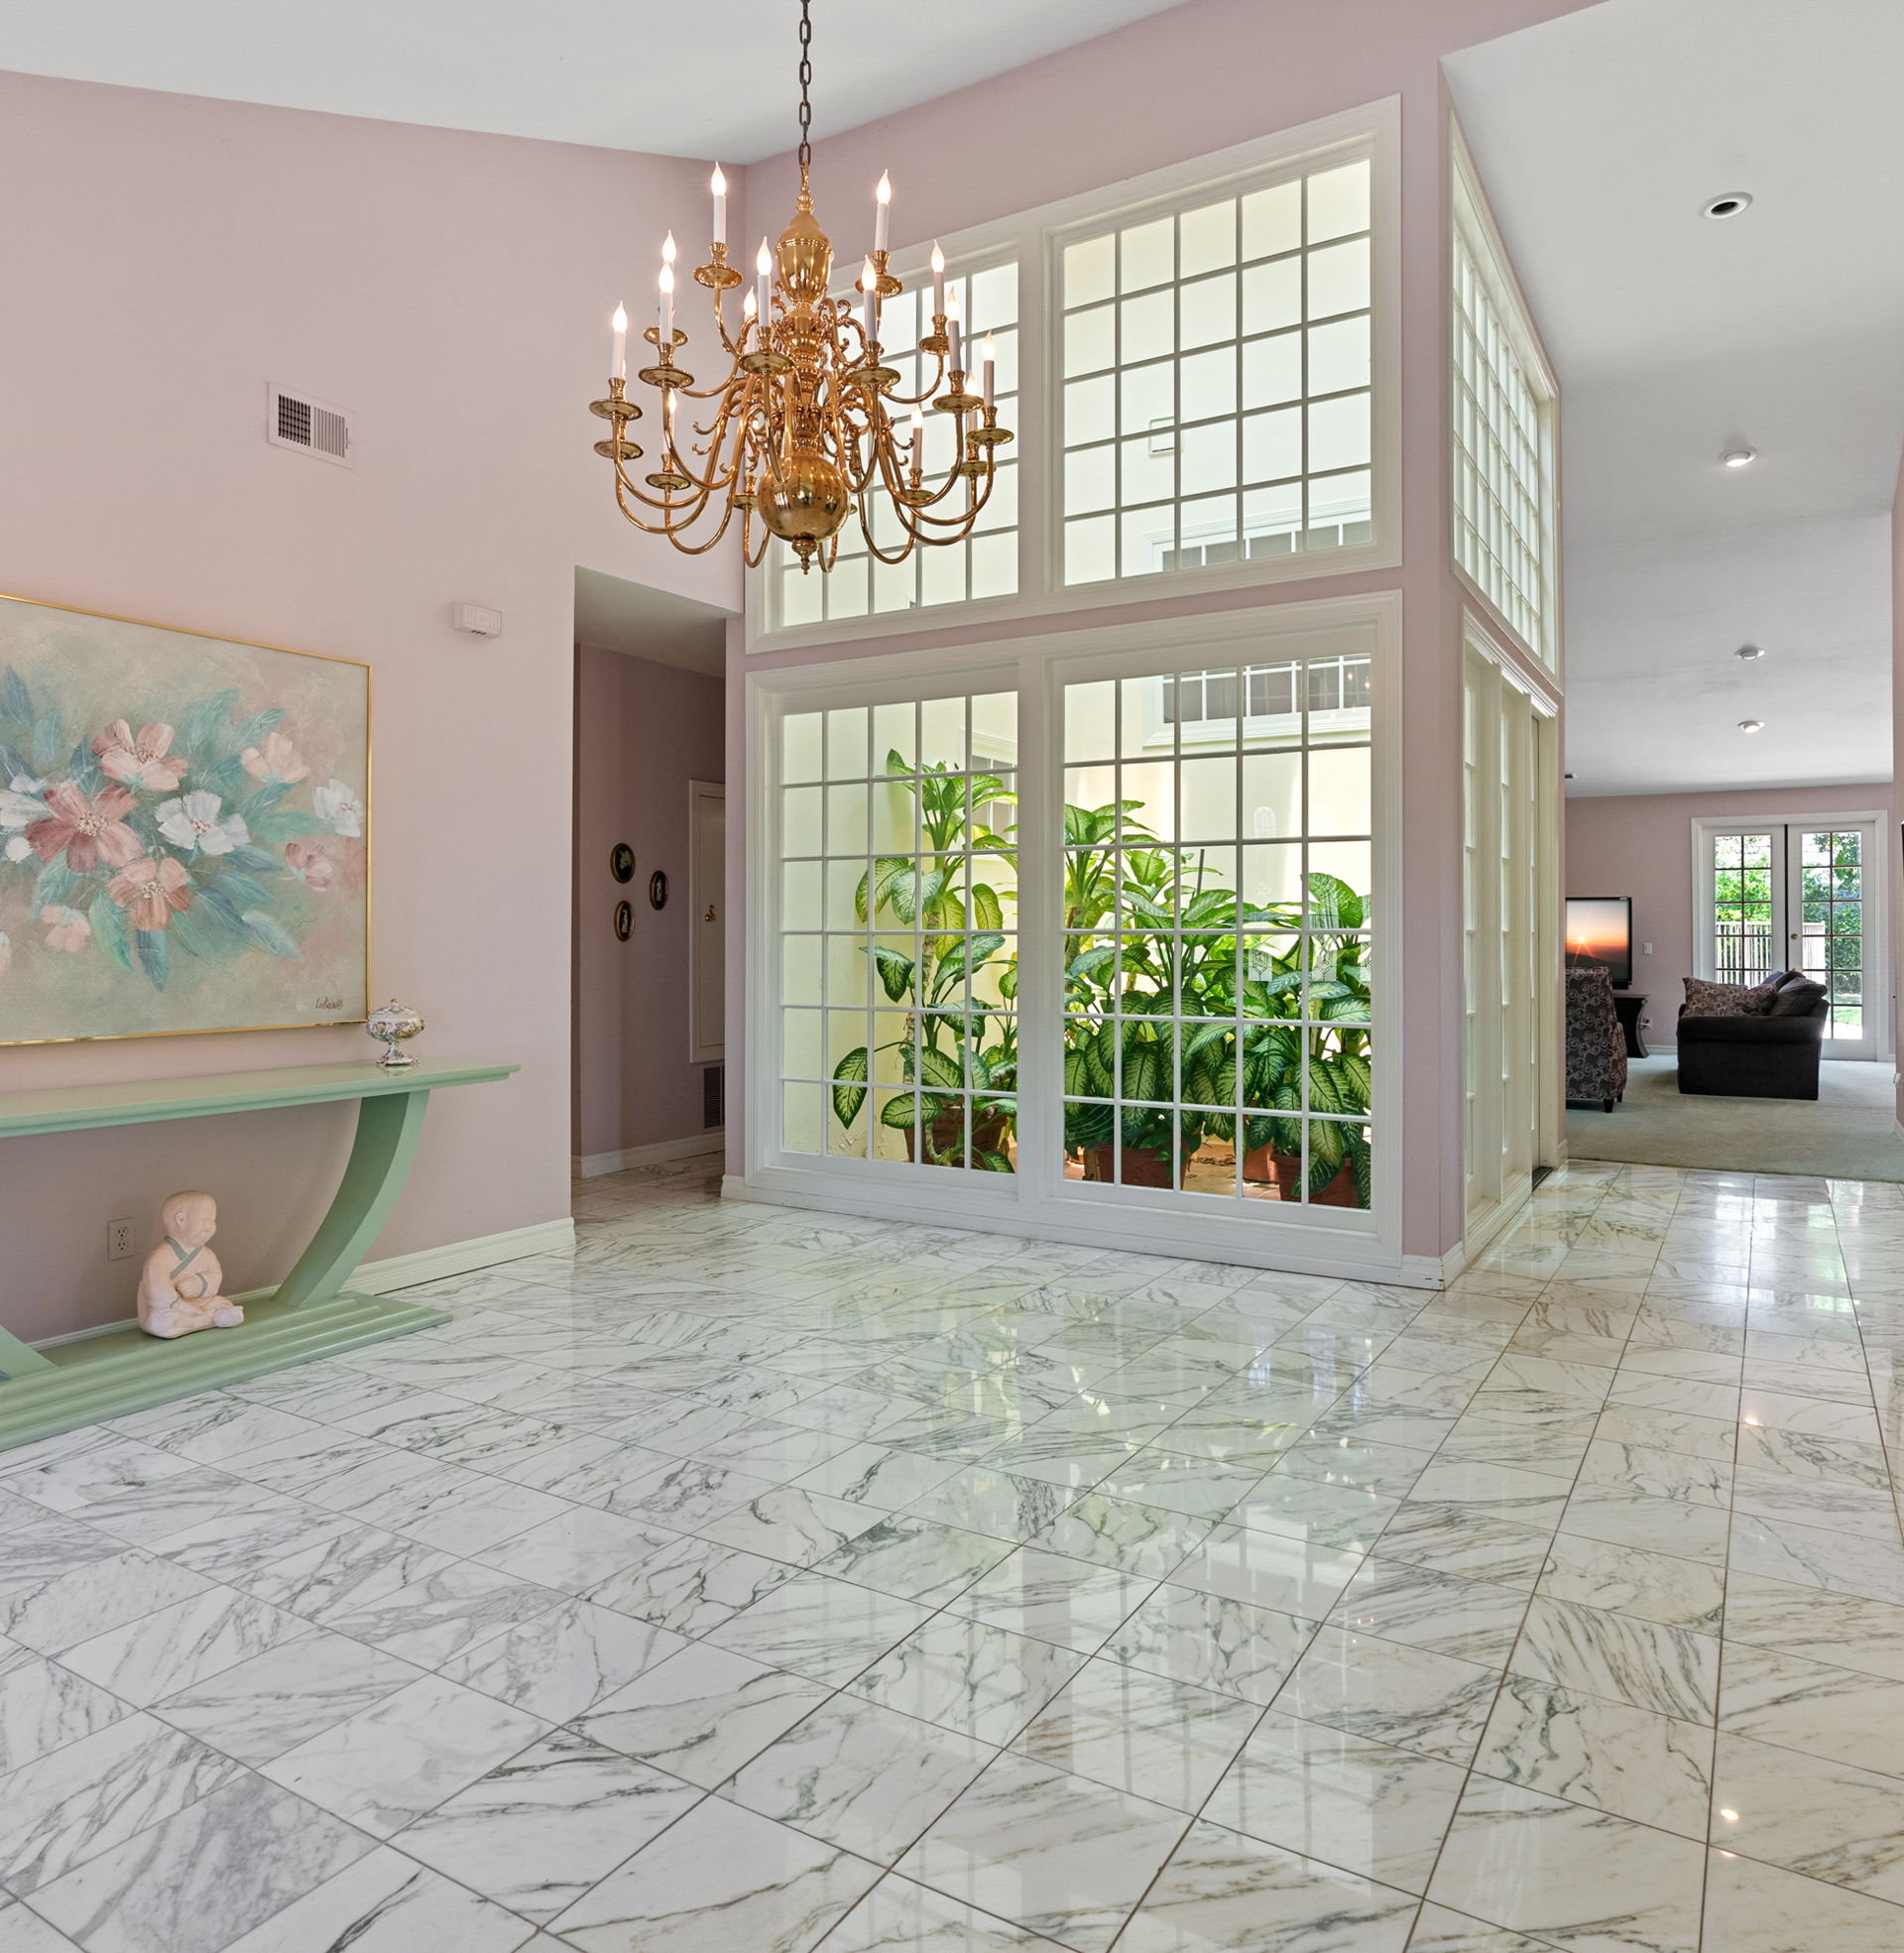 interior space with tile flooring and natural light